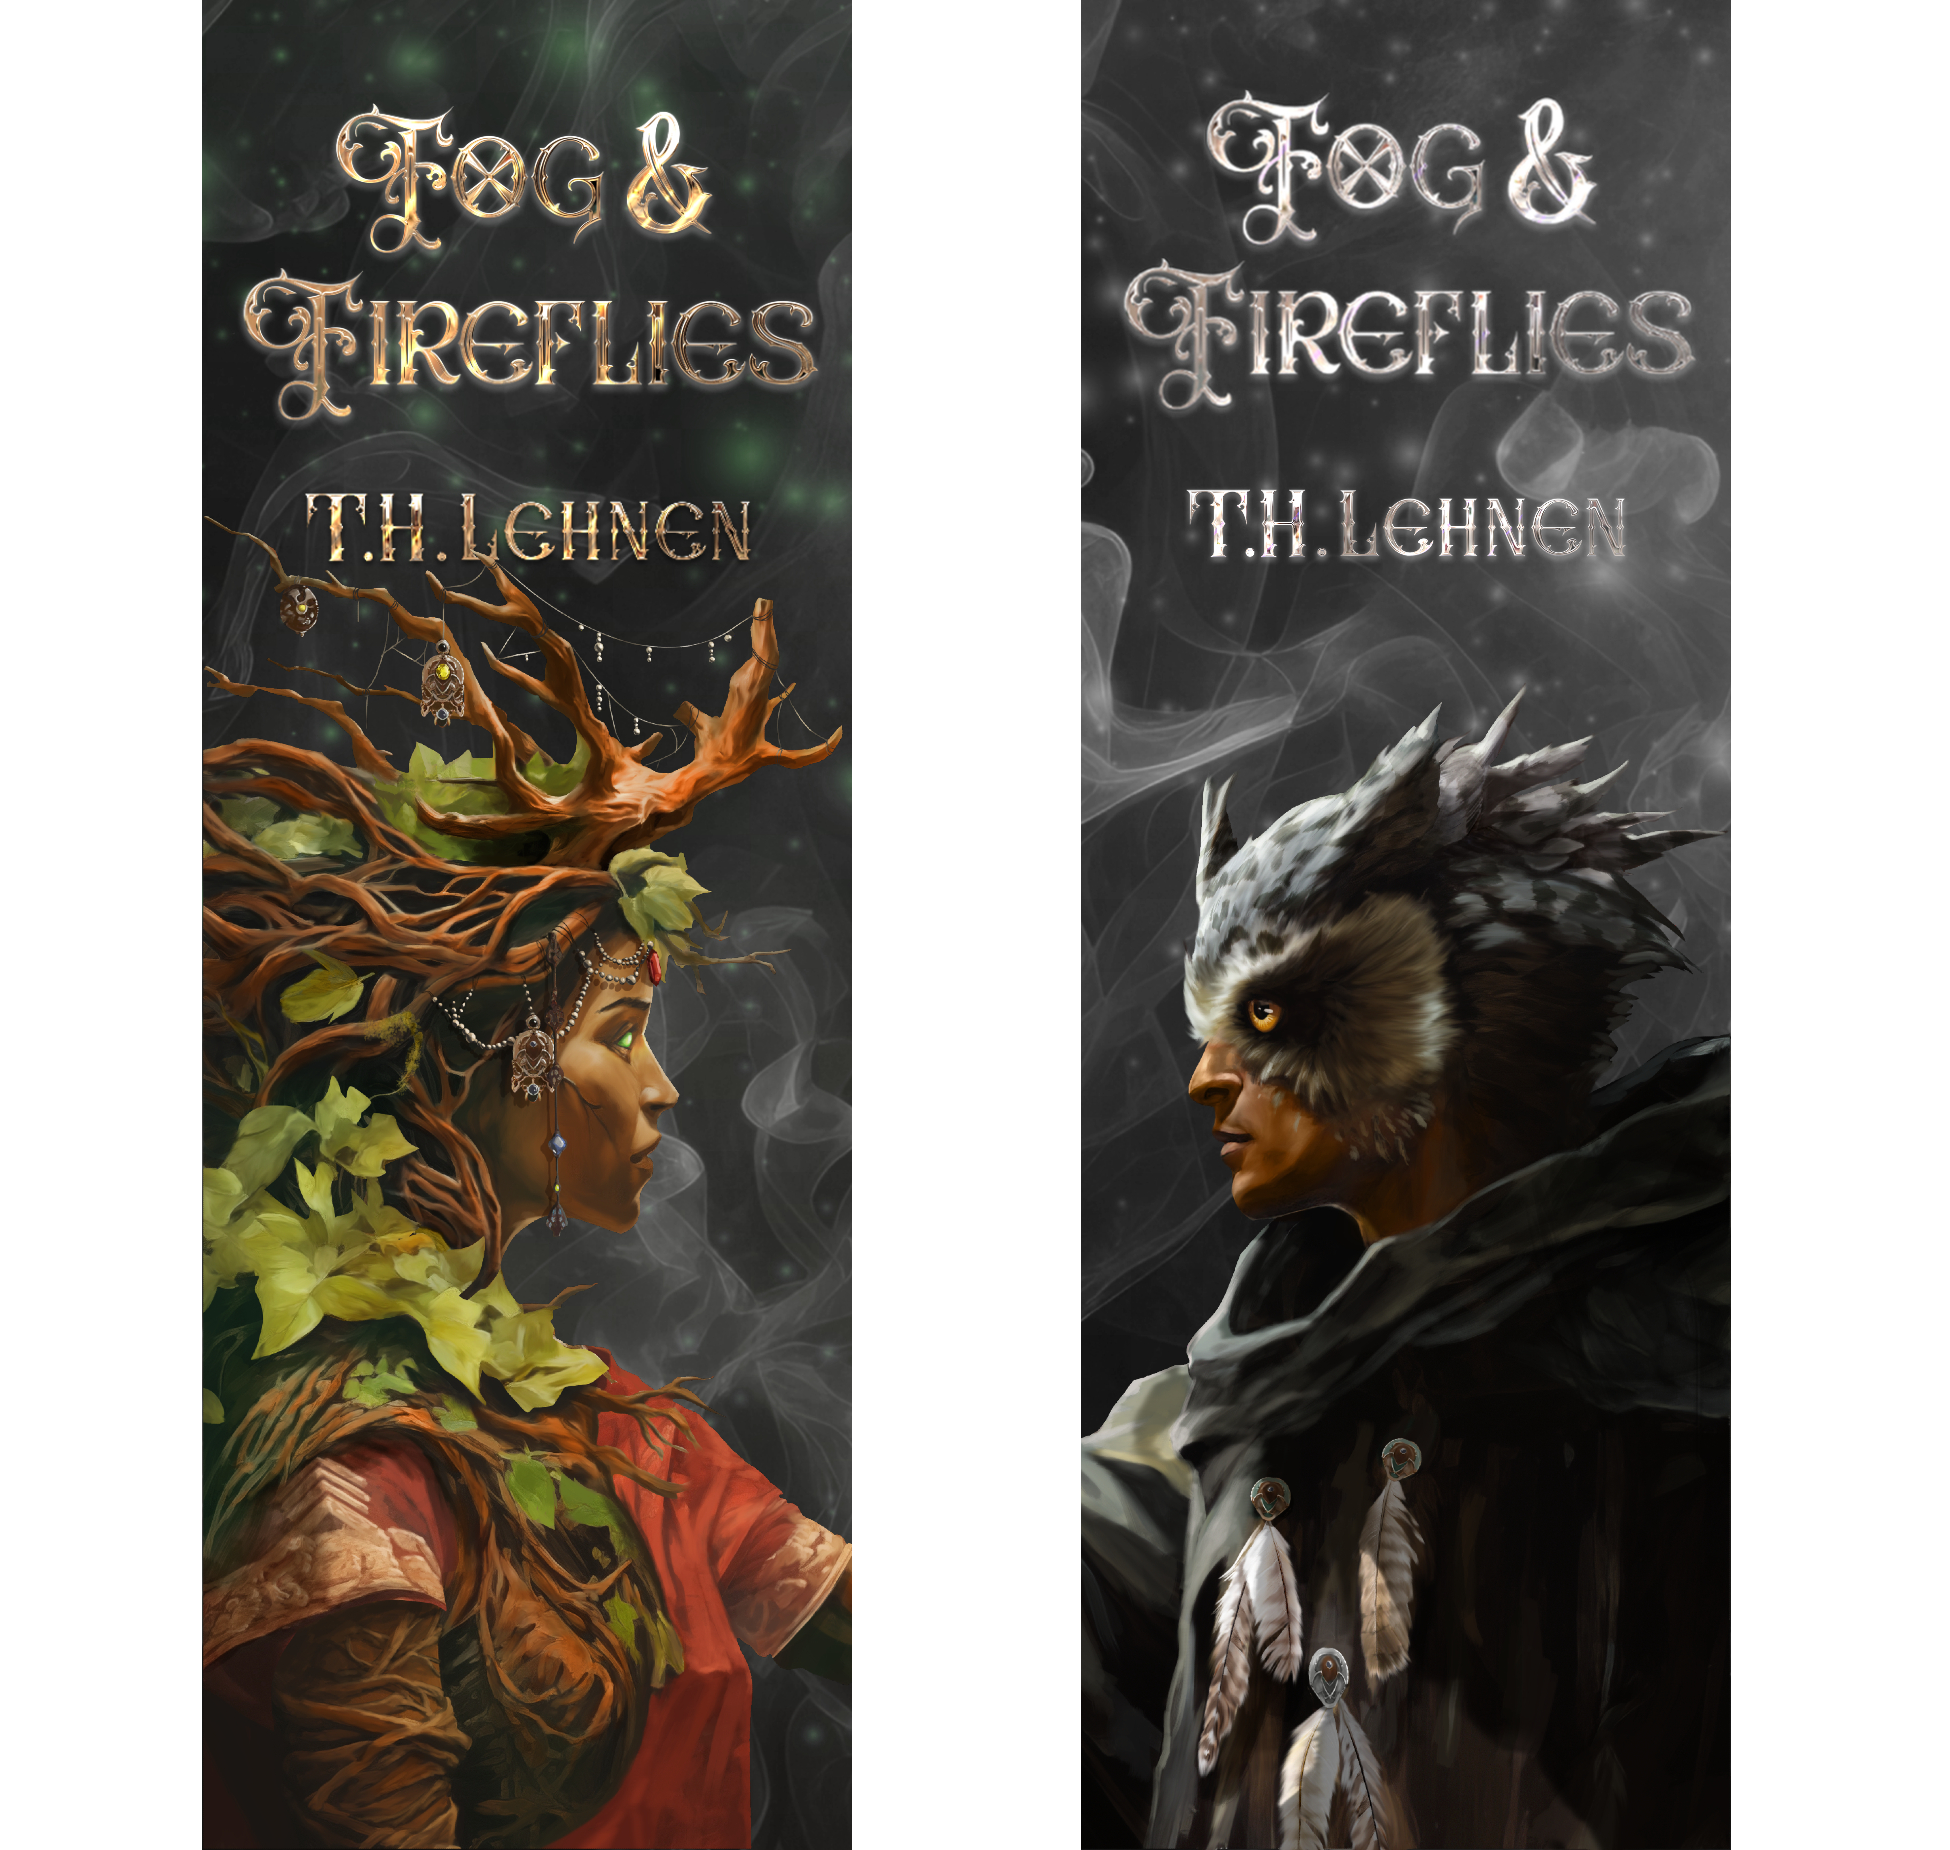 Purchase bookmarks with Fog & Fireflies, featuring Melial and Nod.